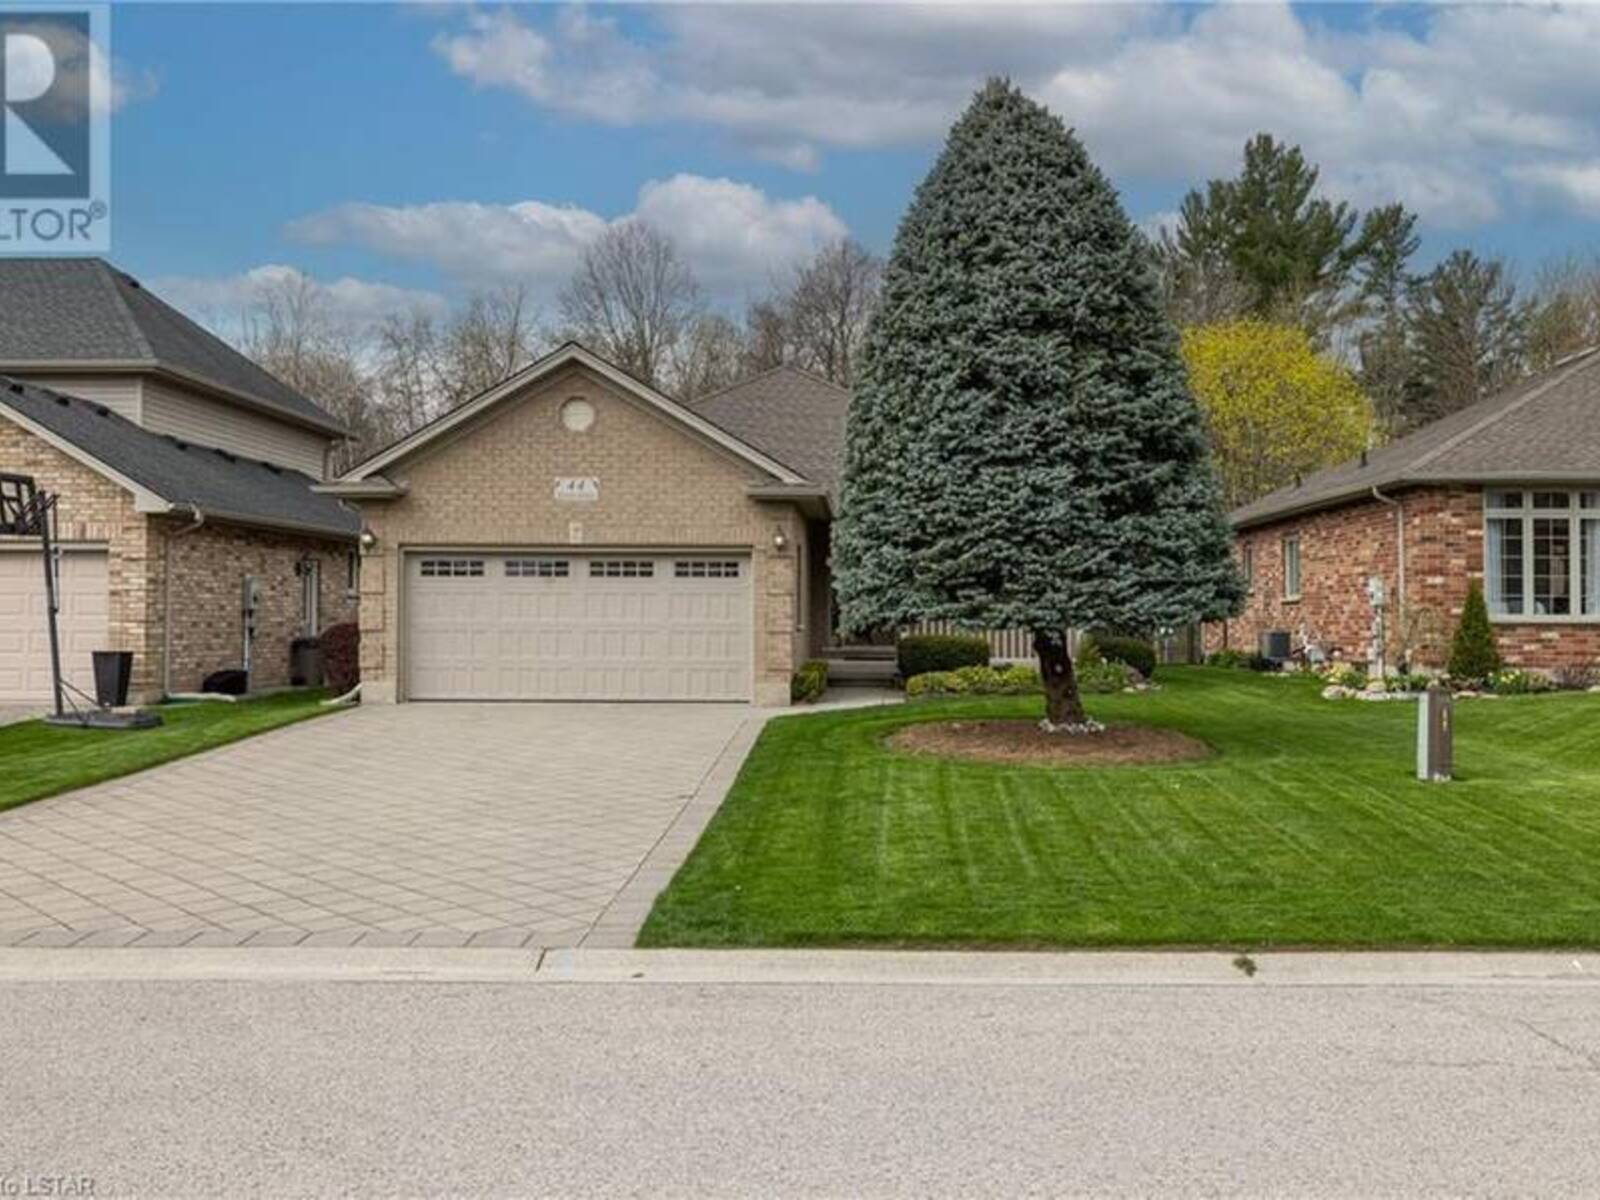 44 FOREST GROVE Crescent, Dorchester, Ontario N0L 1G3